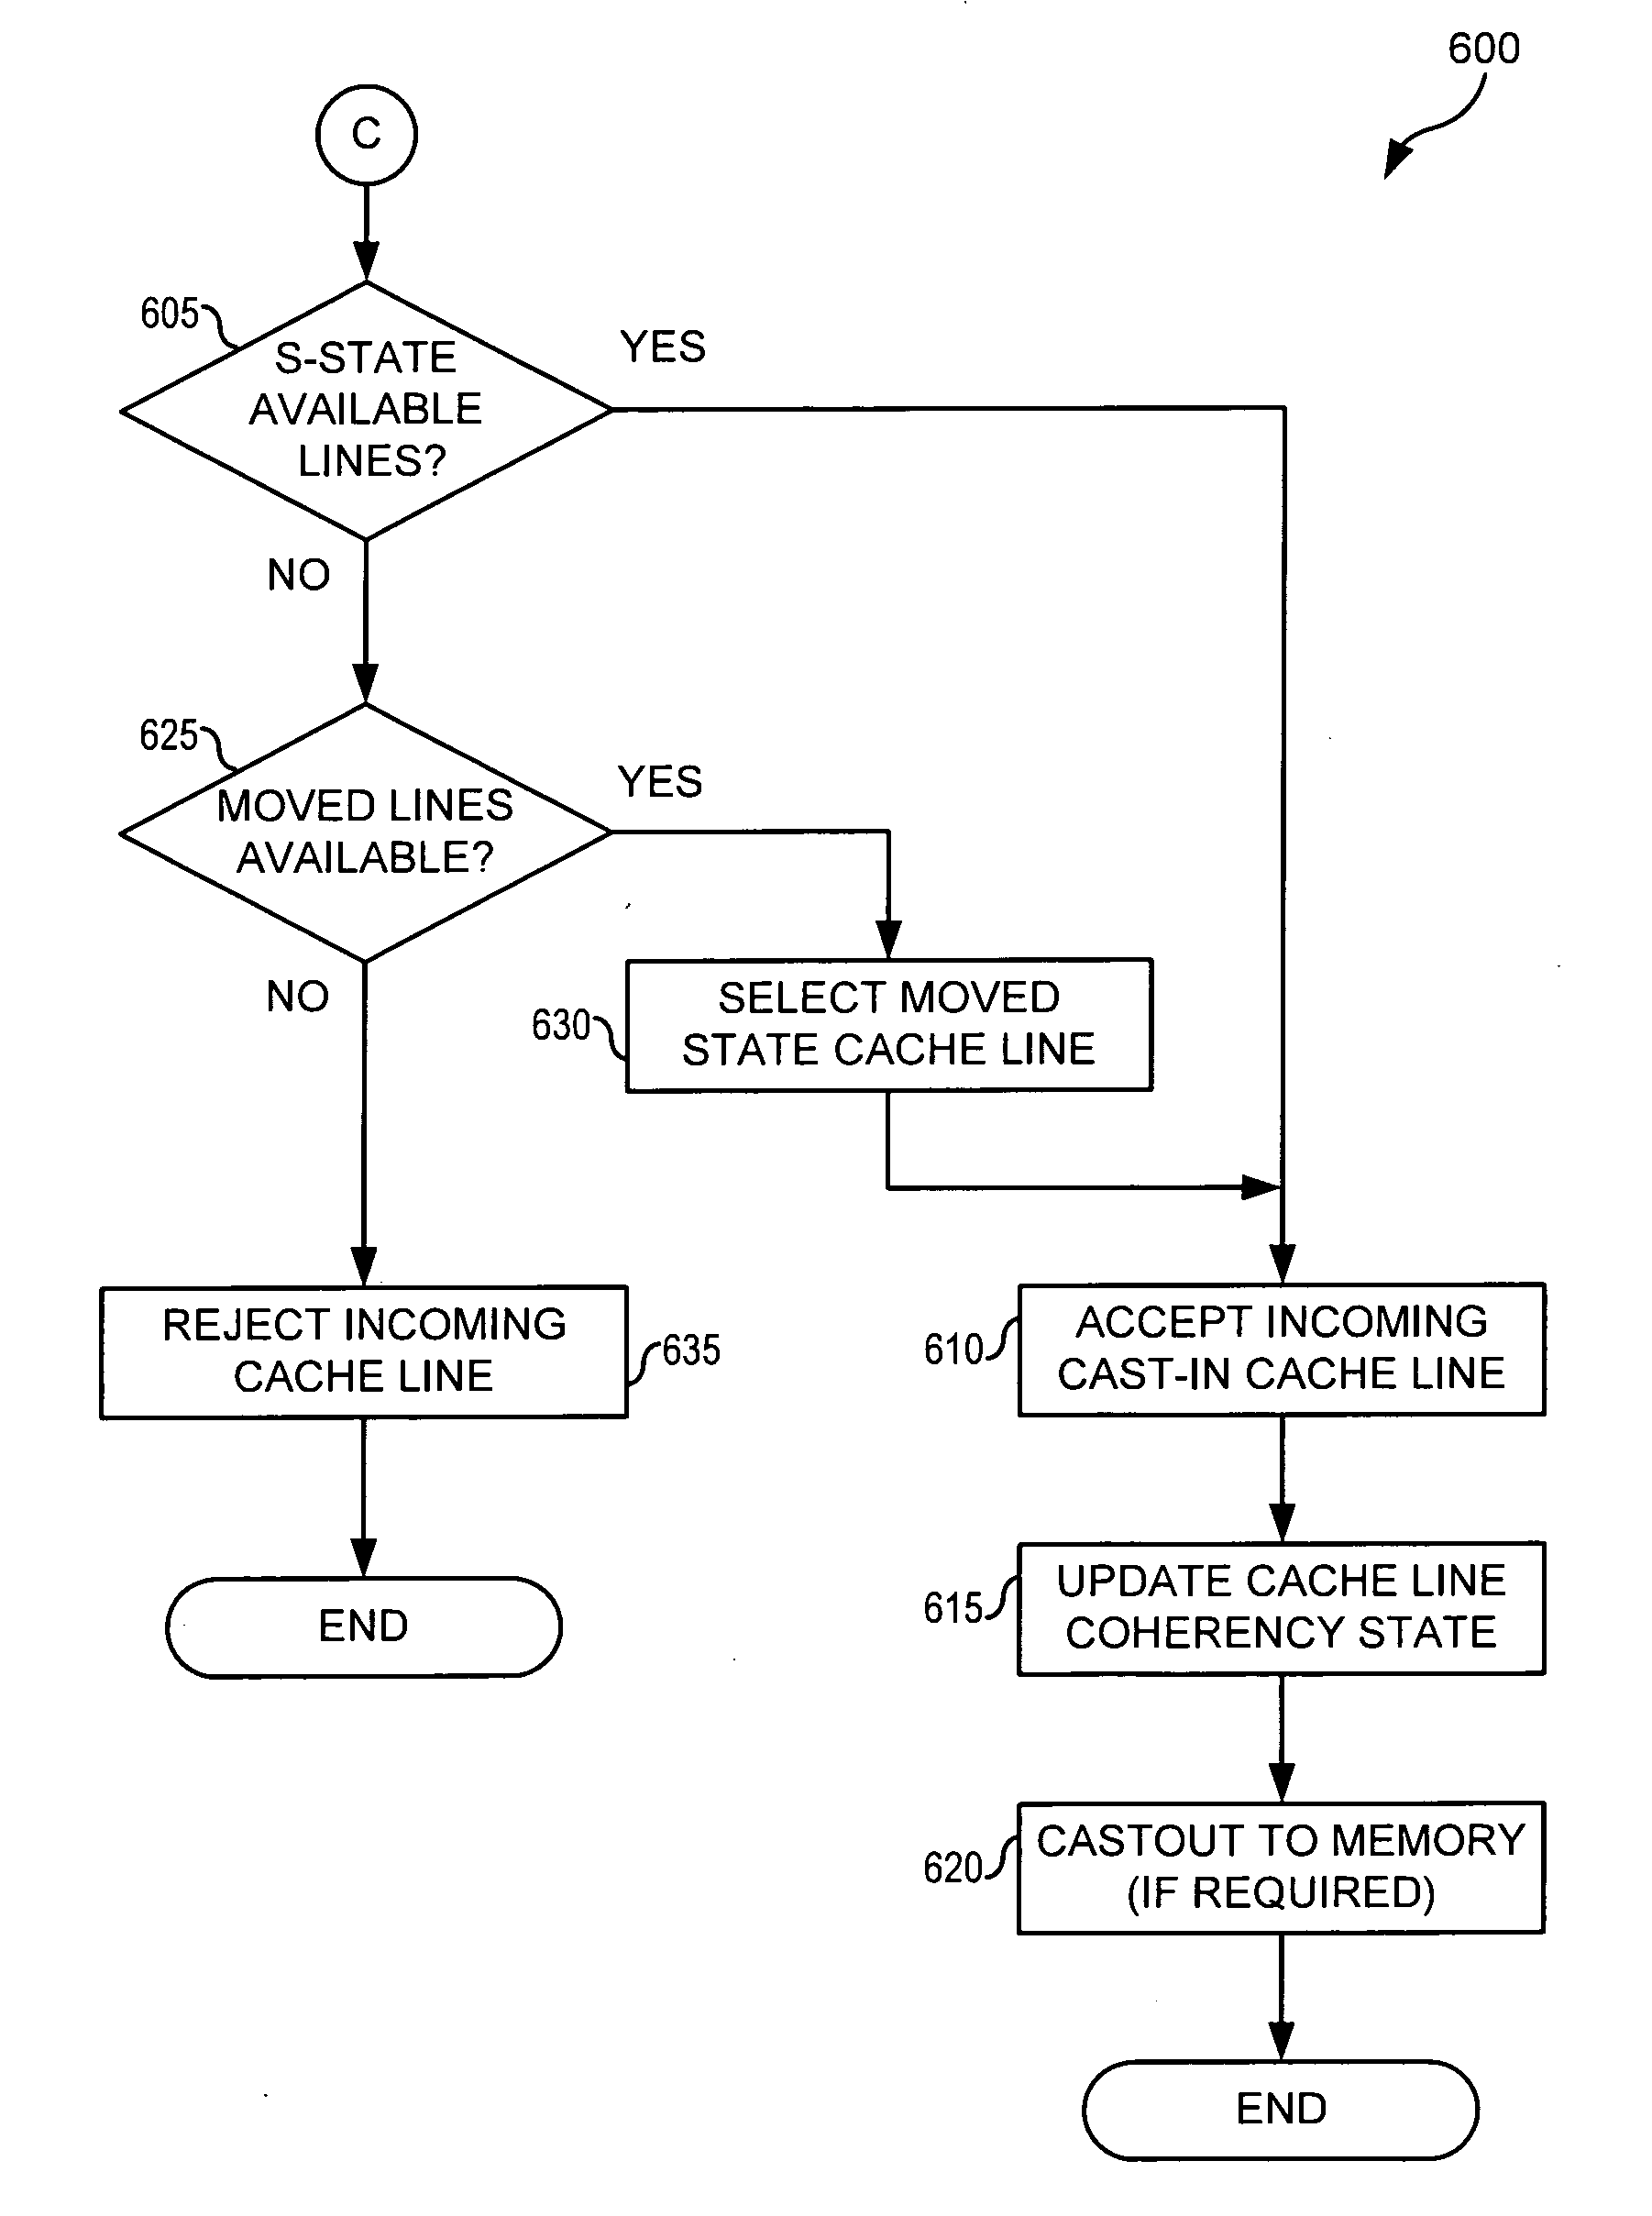 System and Method for Cache Line Replacement Selection in a Multiprocessor Environment